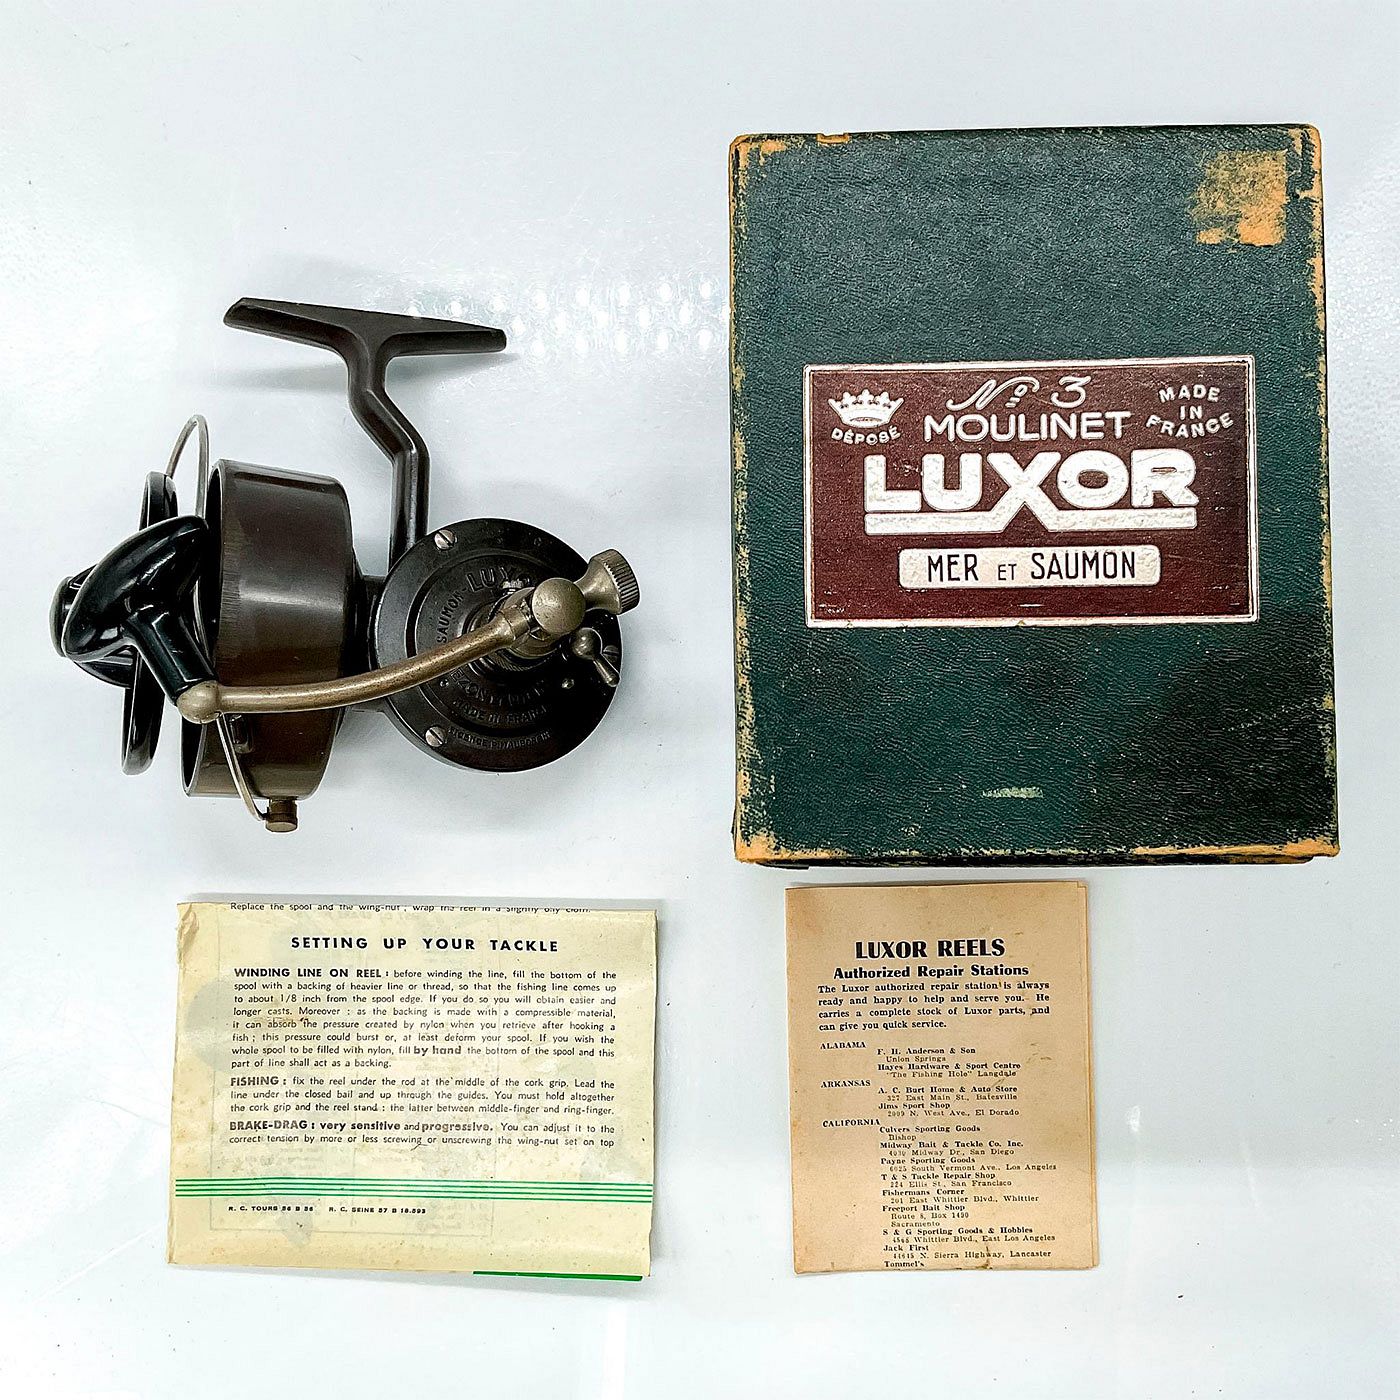 Luxor No. 3 Model C Spinning Reel with Box and Papers sold at